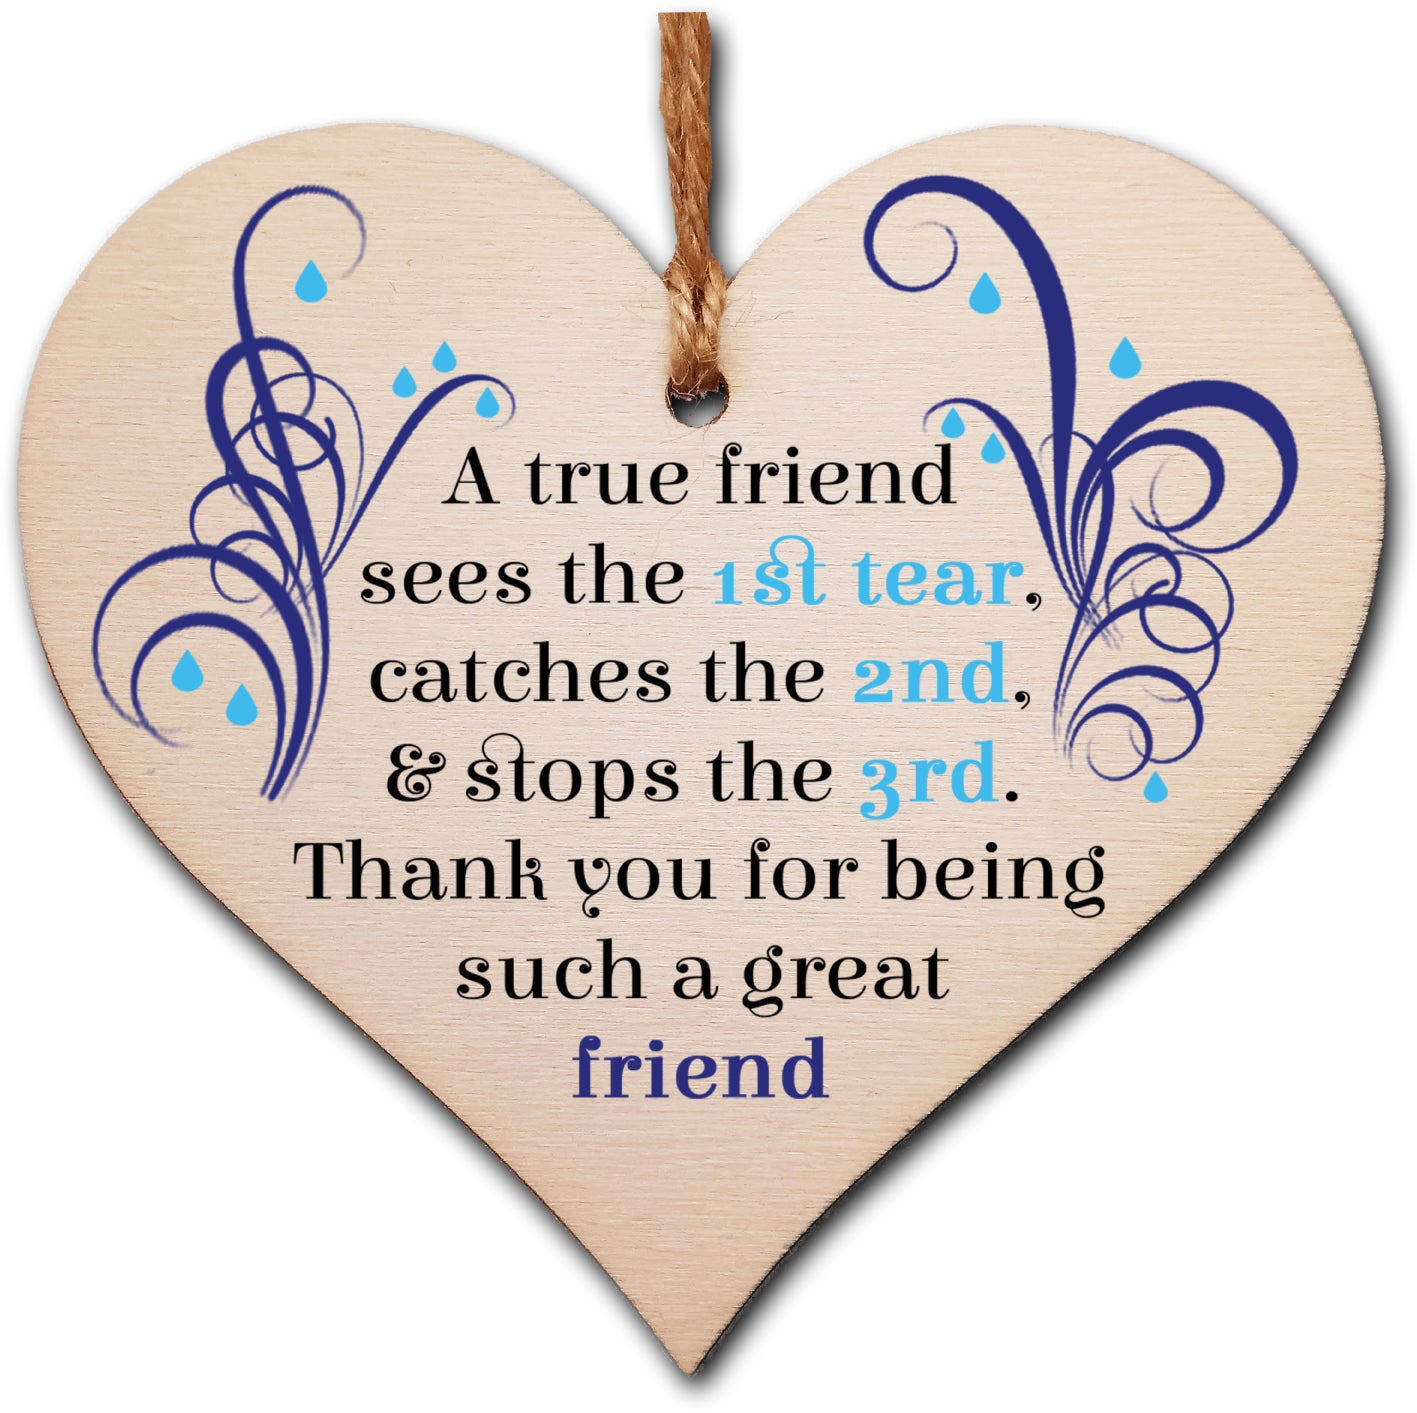 Best Friendship Gifts for Women Wooden Hearts Plaques Hanging